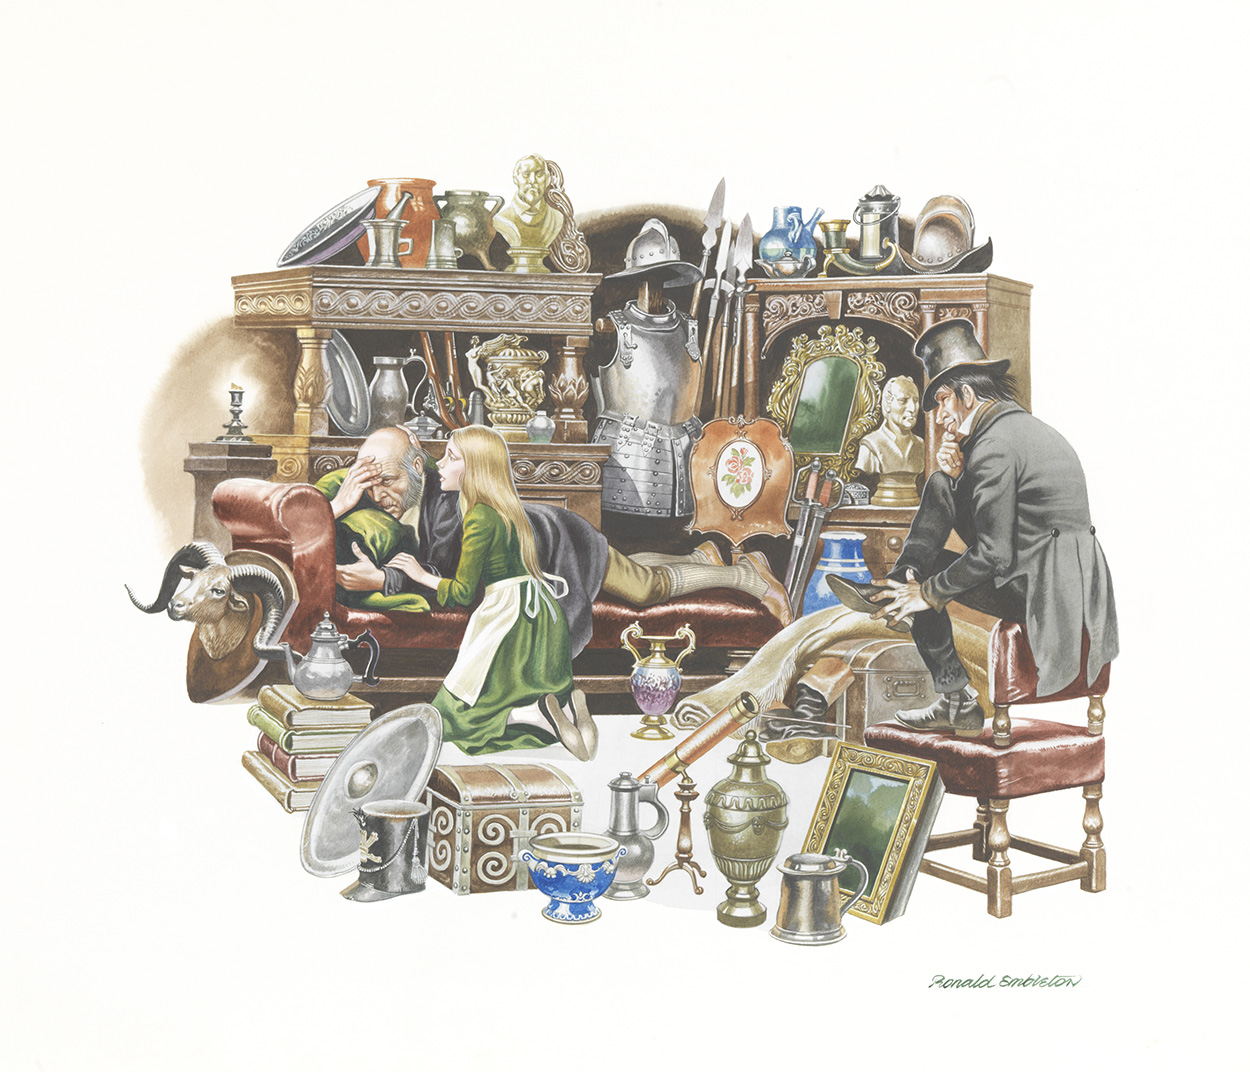 The Old Curiosity Shop (Original) (Signed) art by Charles Dickens (Ron Embleton) at The Illustration Art Gallery